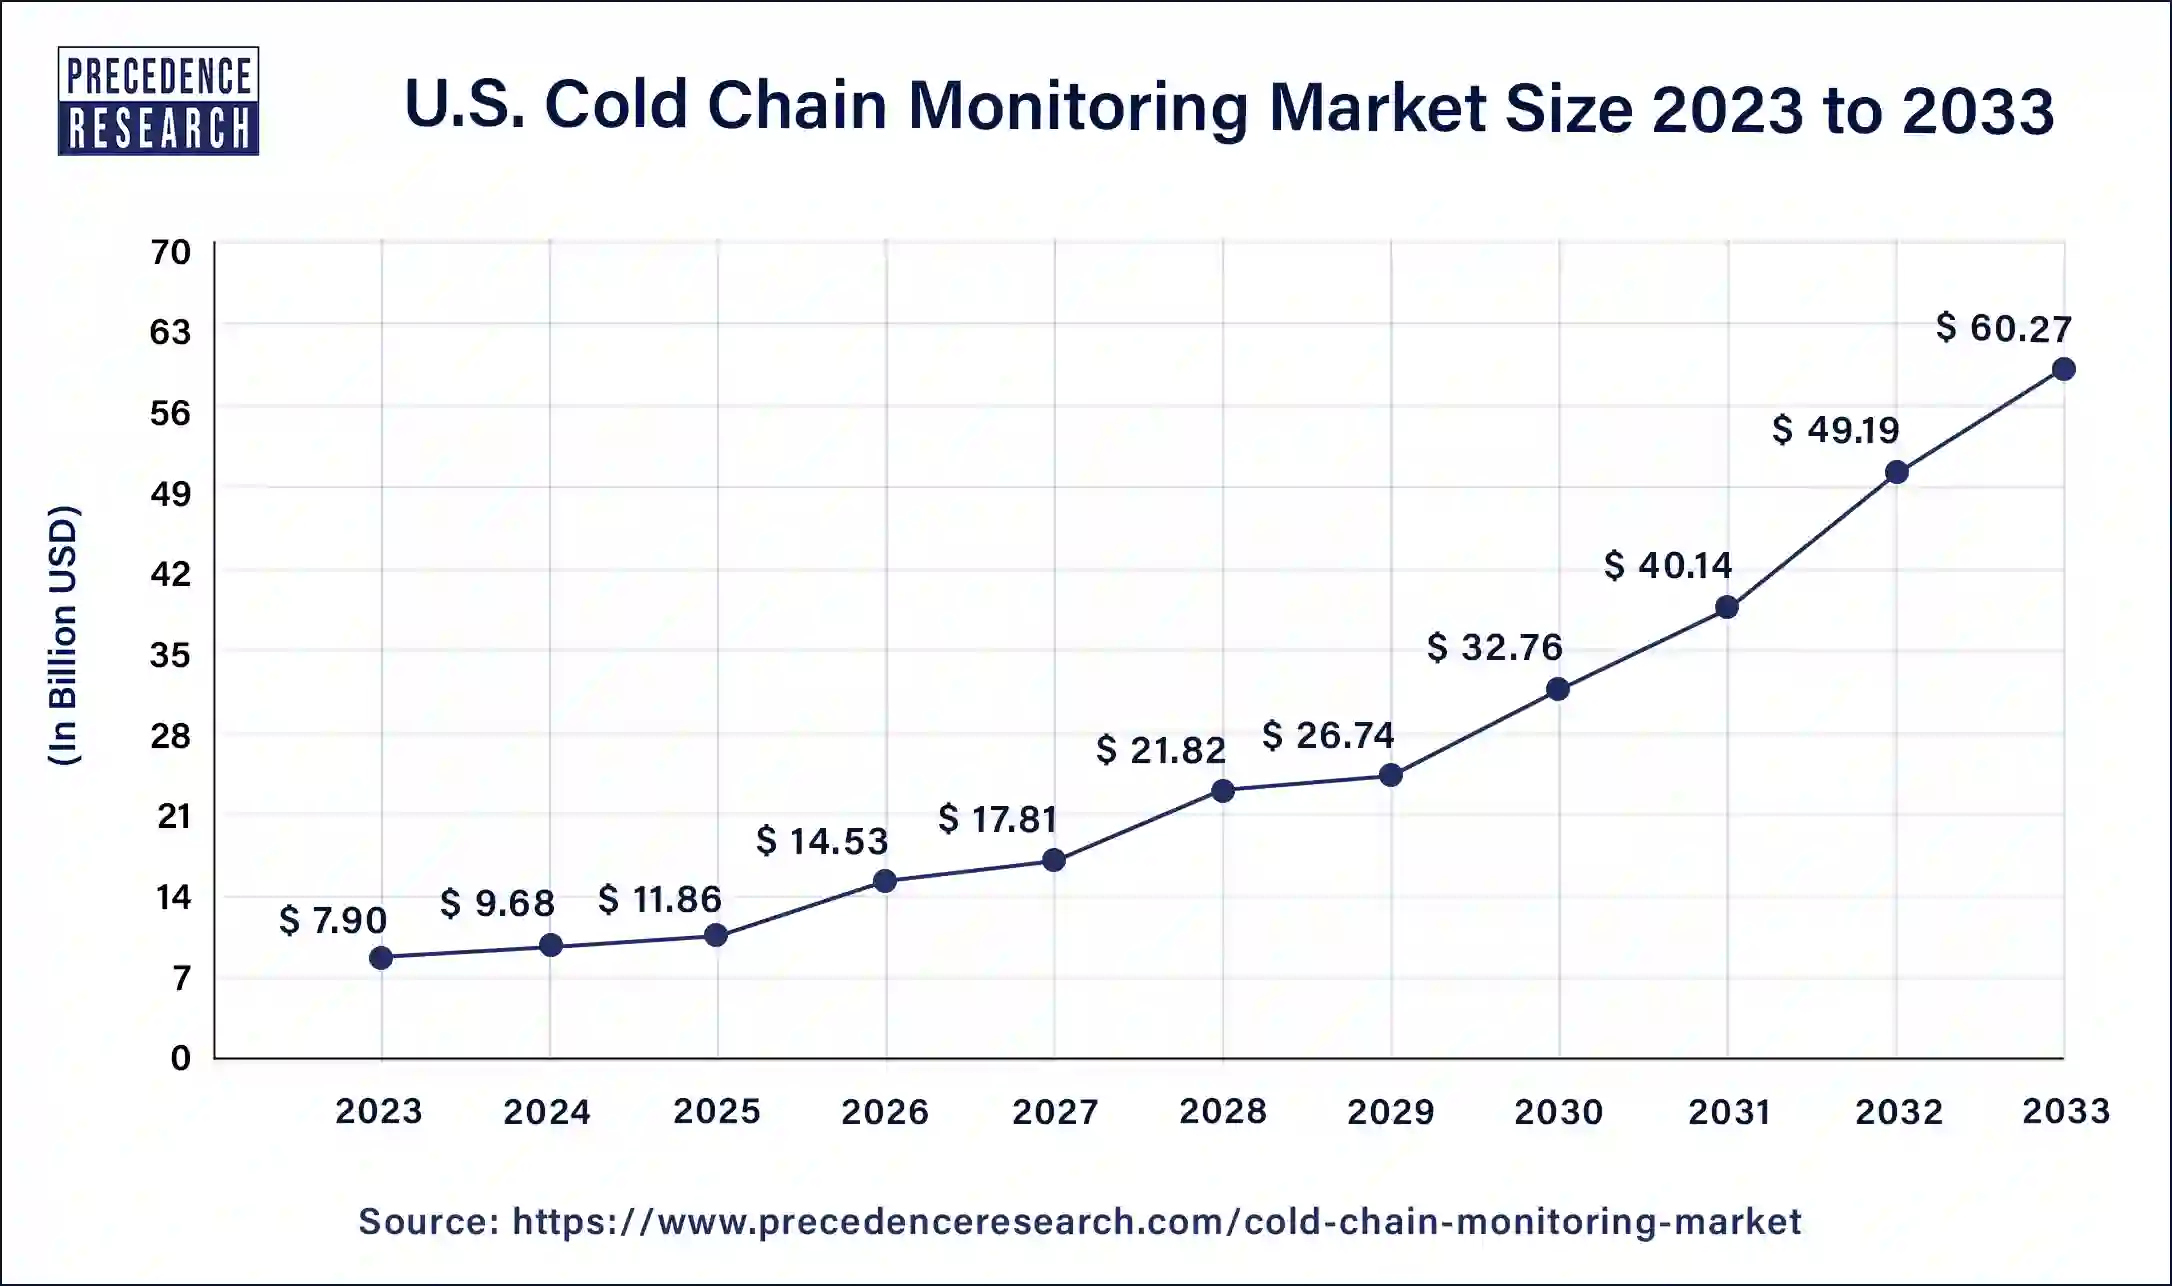 U.S. Cold Chain Monitoring Market Size 2024 to 2033 